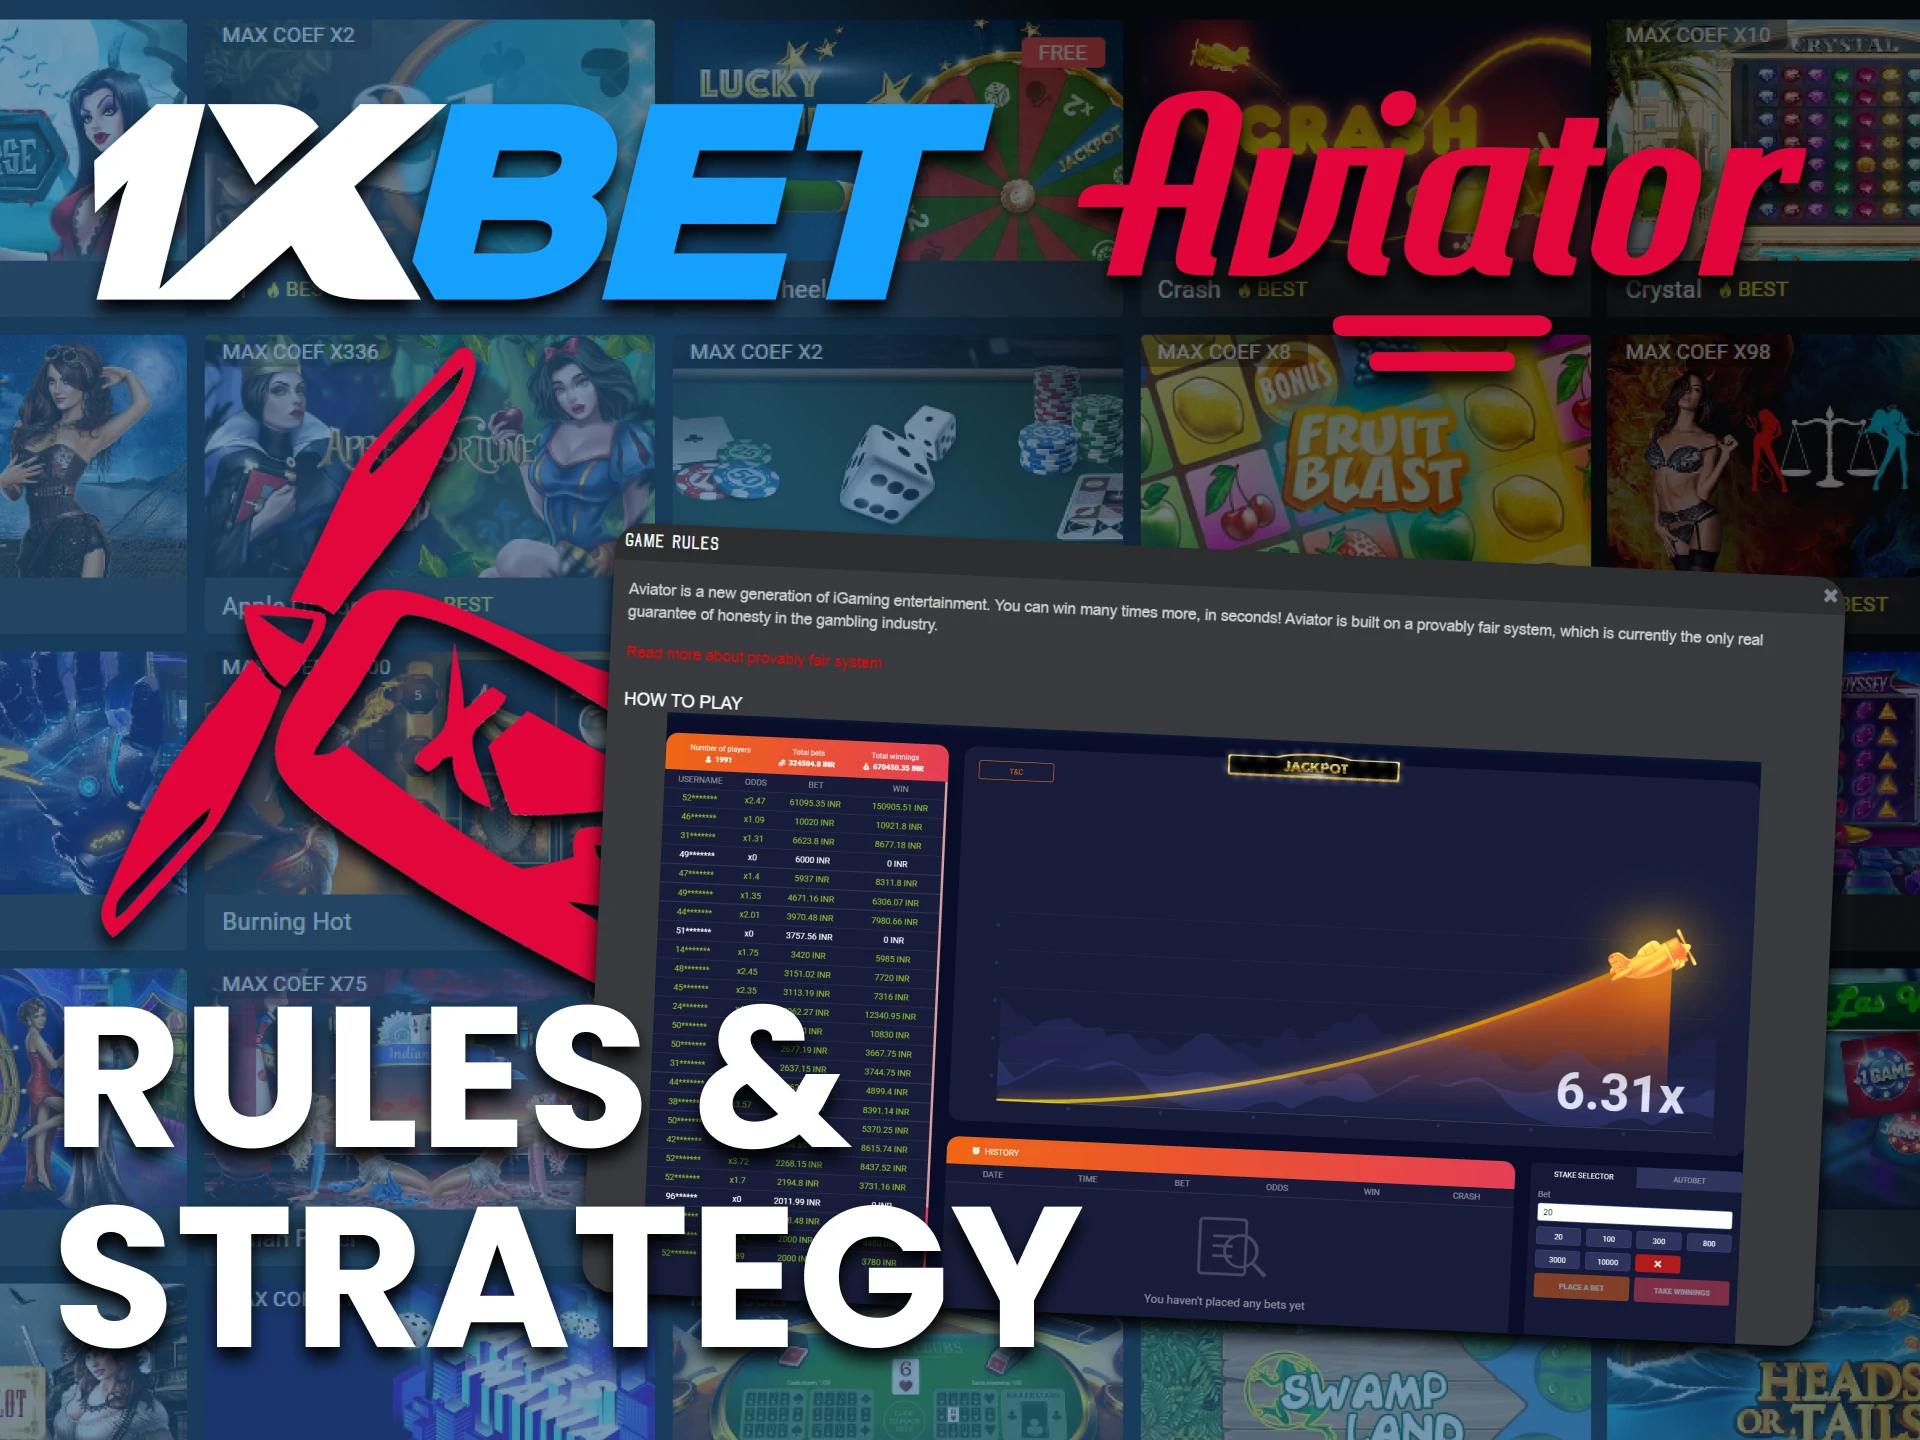 The rules of the game on 1xbet are the same as for Aviator on other sites.